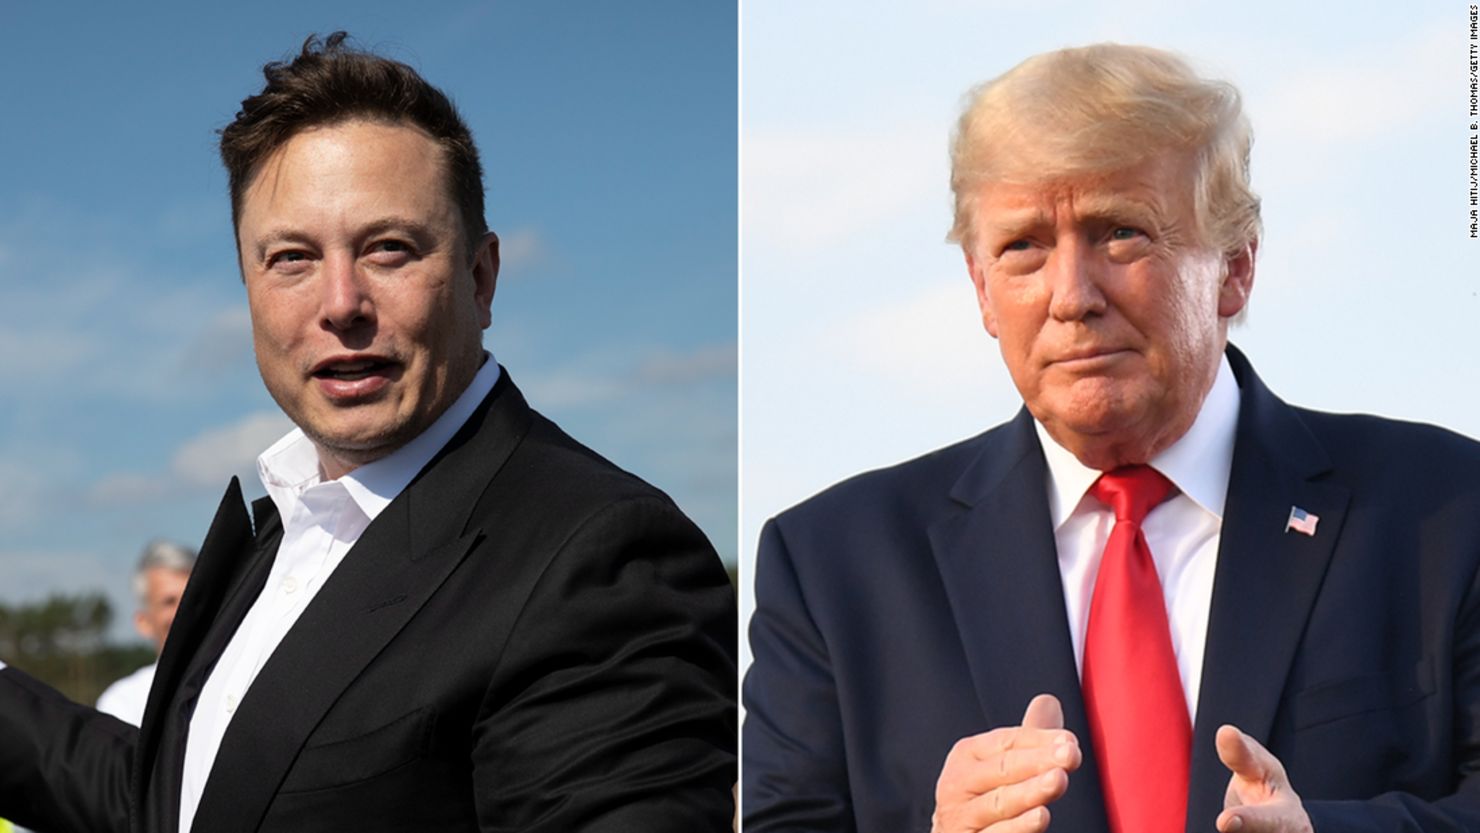 Speculation surrounds Elon Musk's potential impact on Trump's campaign (Credits: CNN)